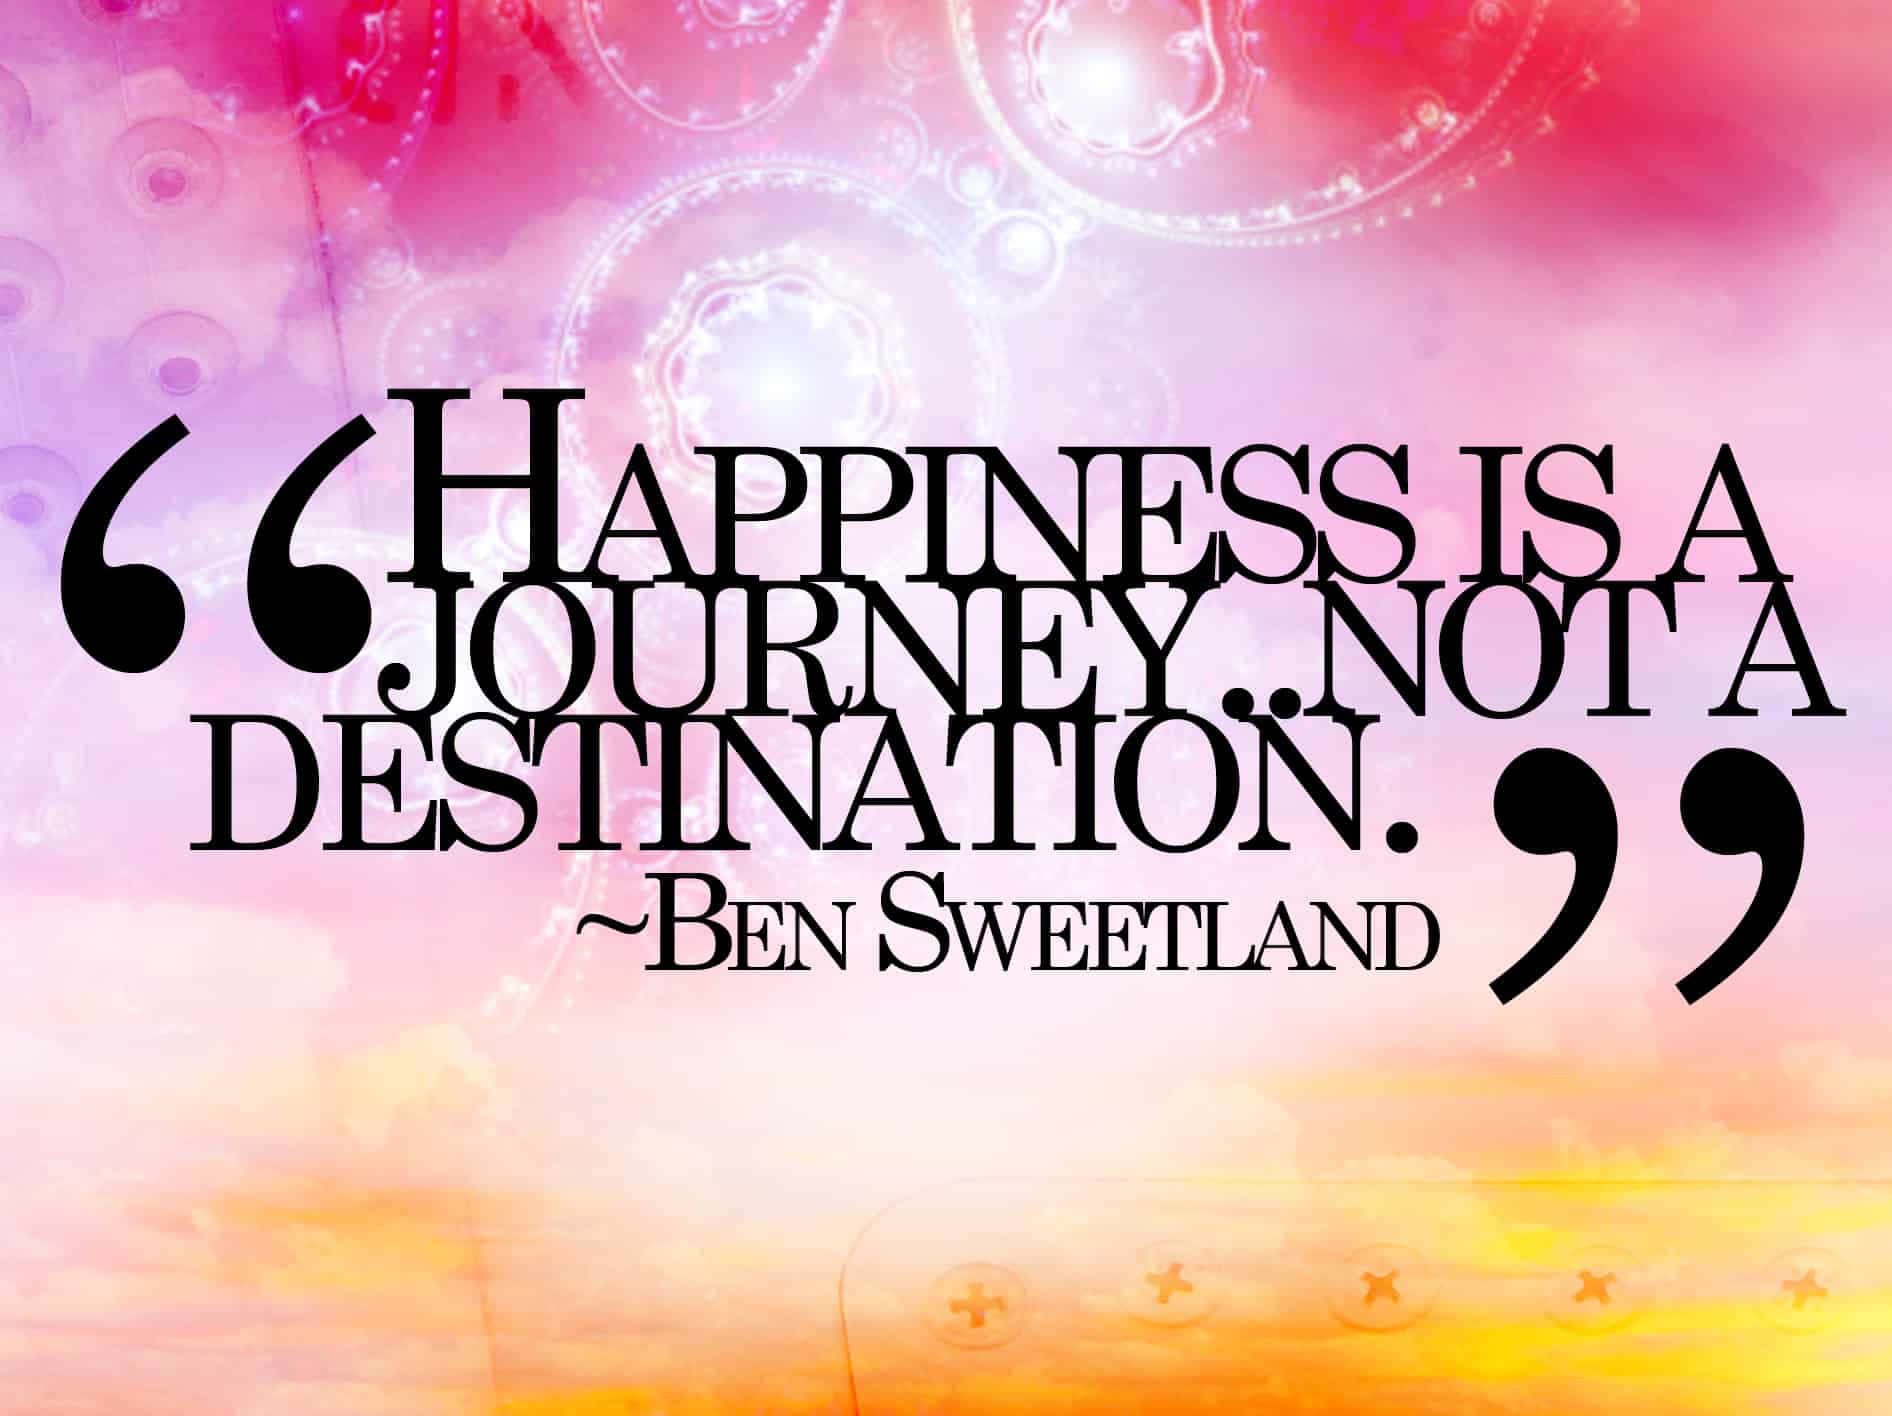 Happiness Journey Not Destination Quote Wallpaper